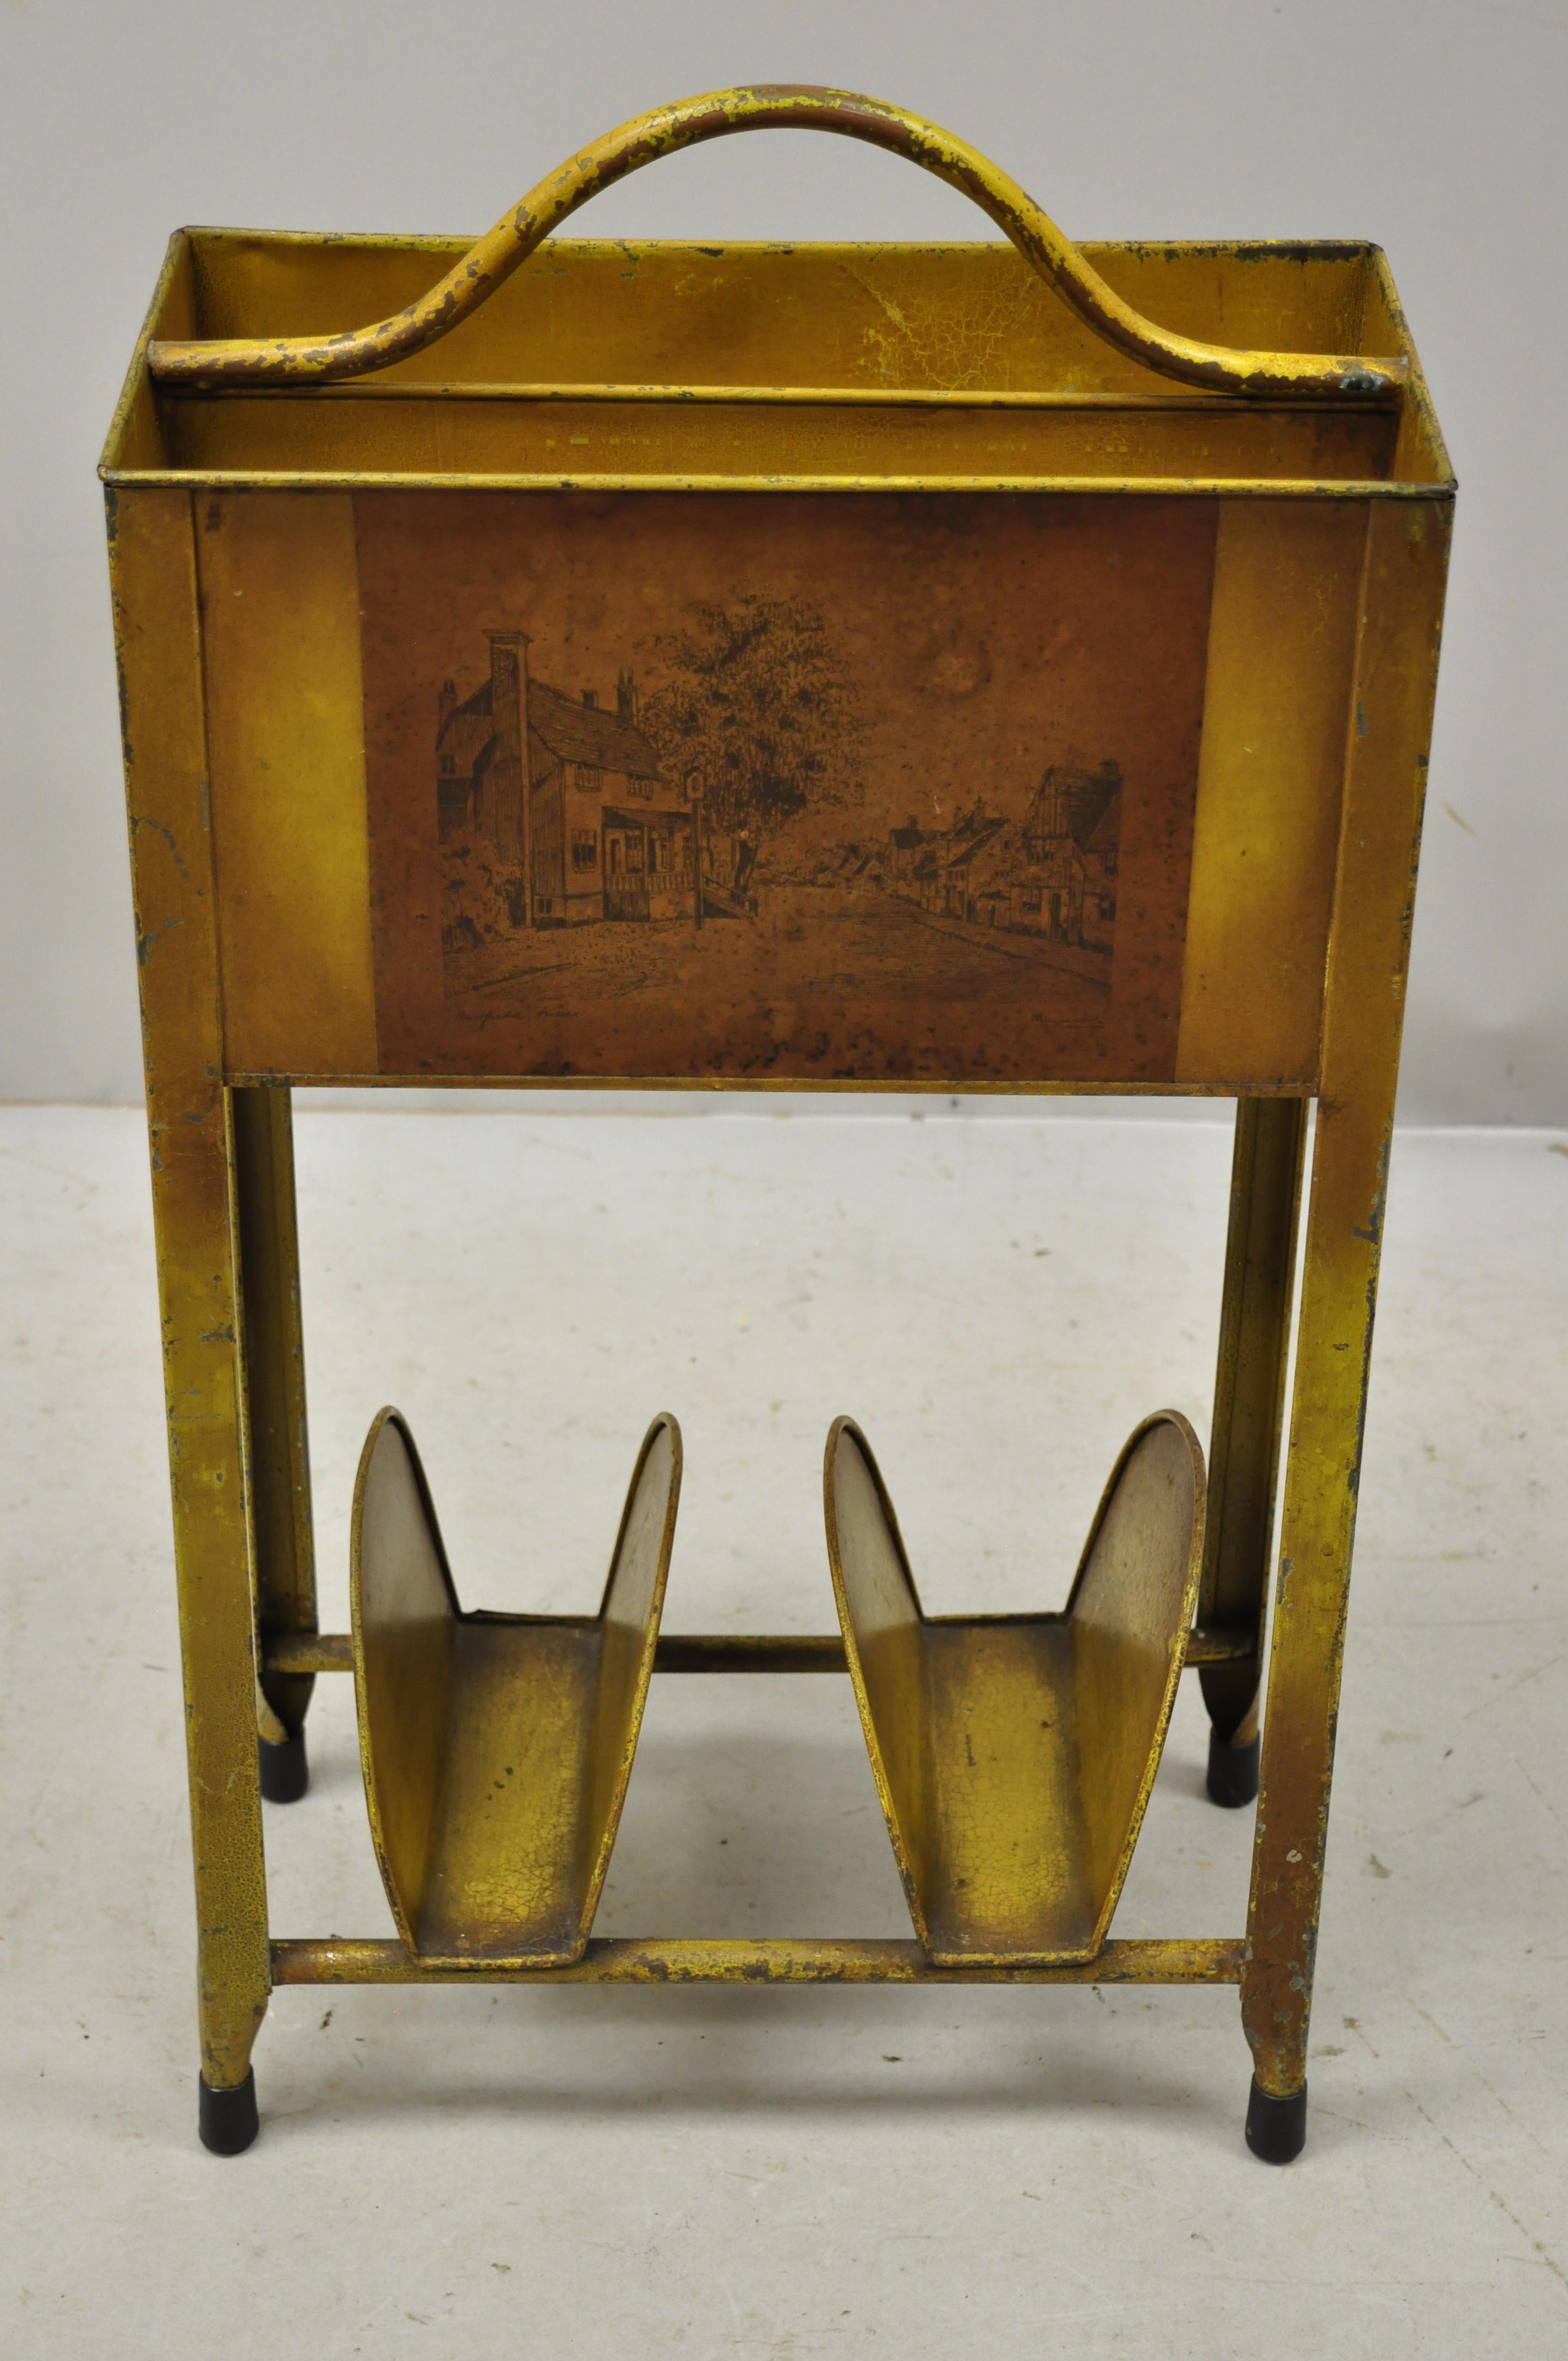 Antique Italian metal yellow toleware magazine rack stand envelope letter shelf. Item features lower envelope slots, unique scenes to both sides, metal frame, circa early-mid-20th century. Measurements: 27.5